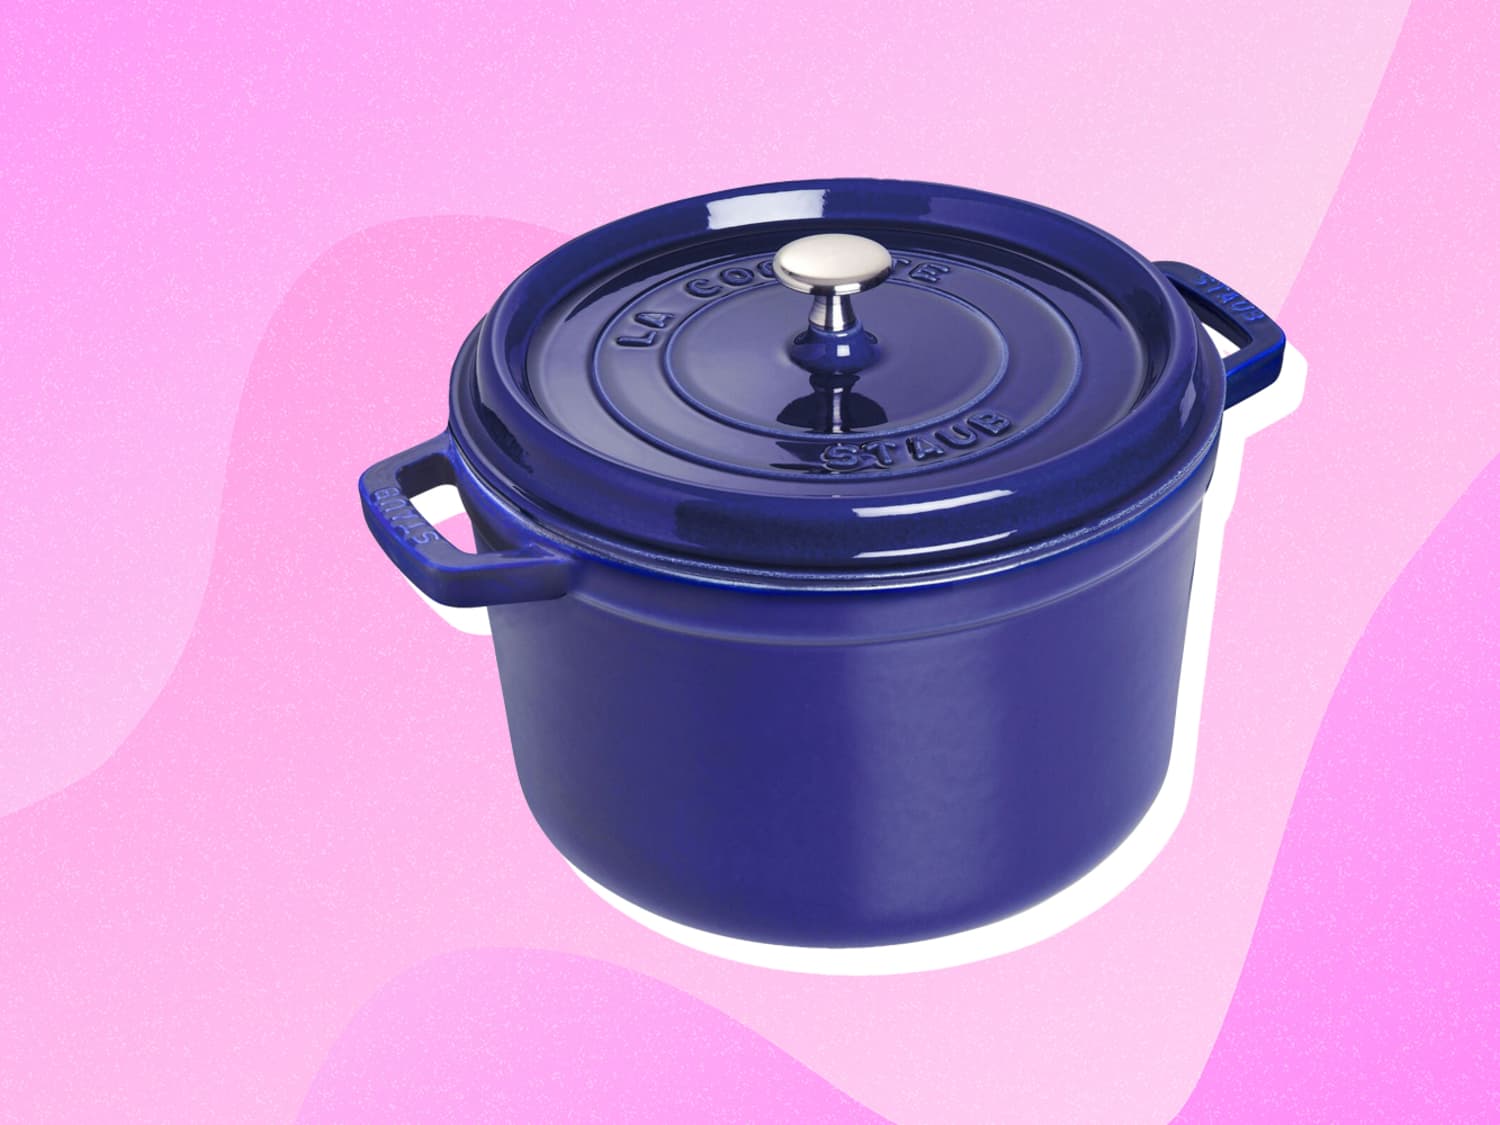 Staub's Extra Tall Dutch Oven Is More Than Half-Off